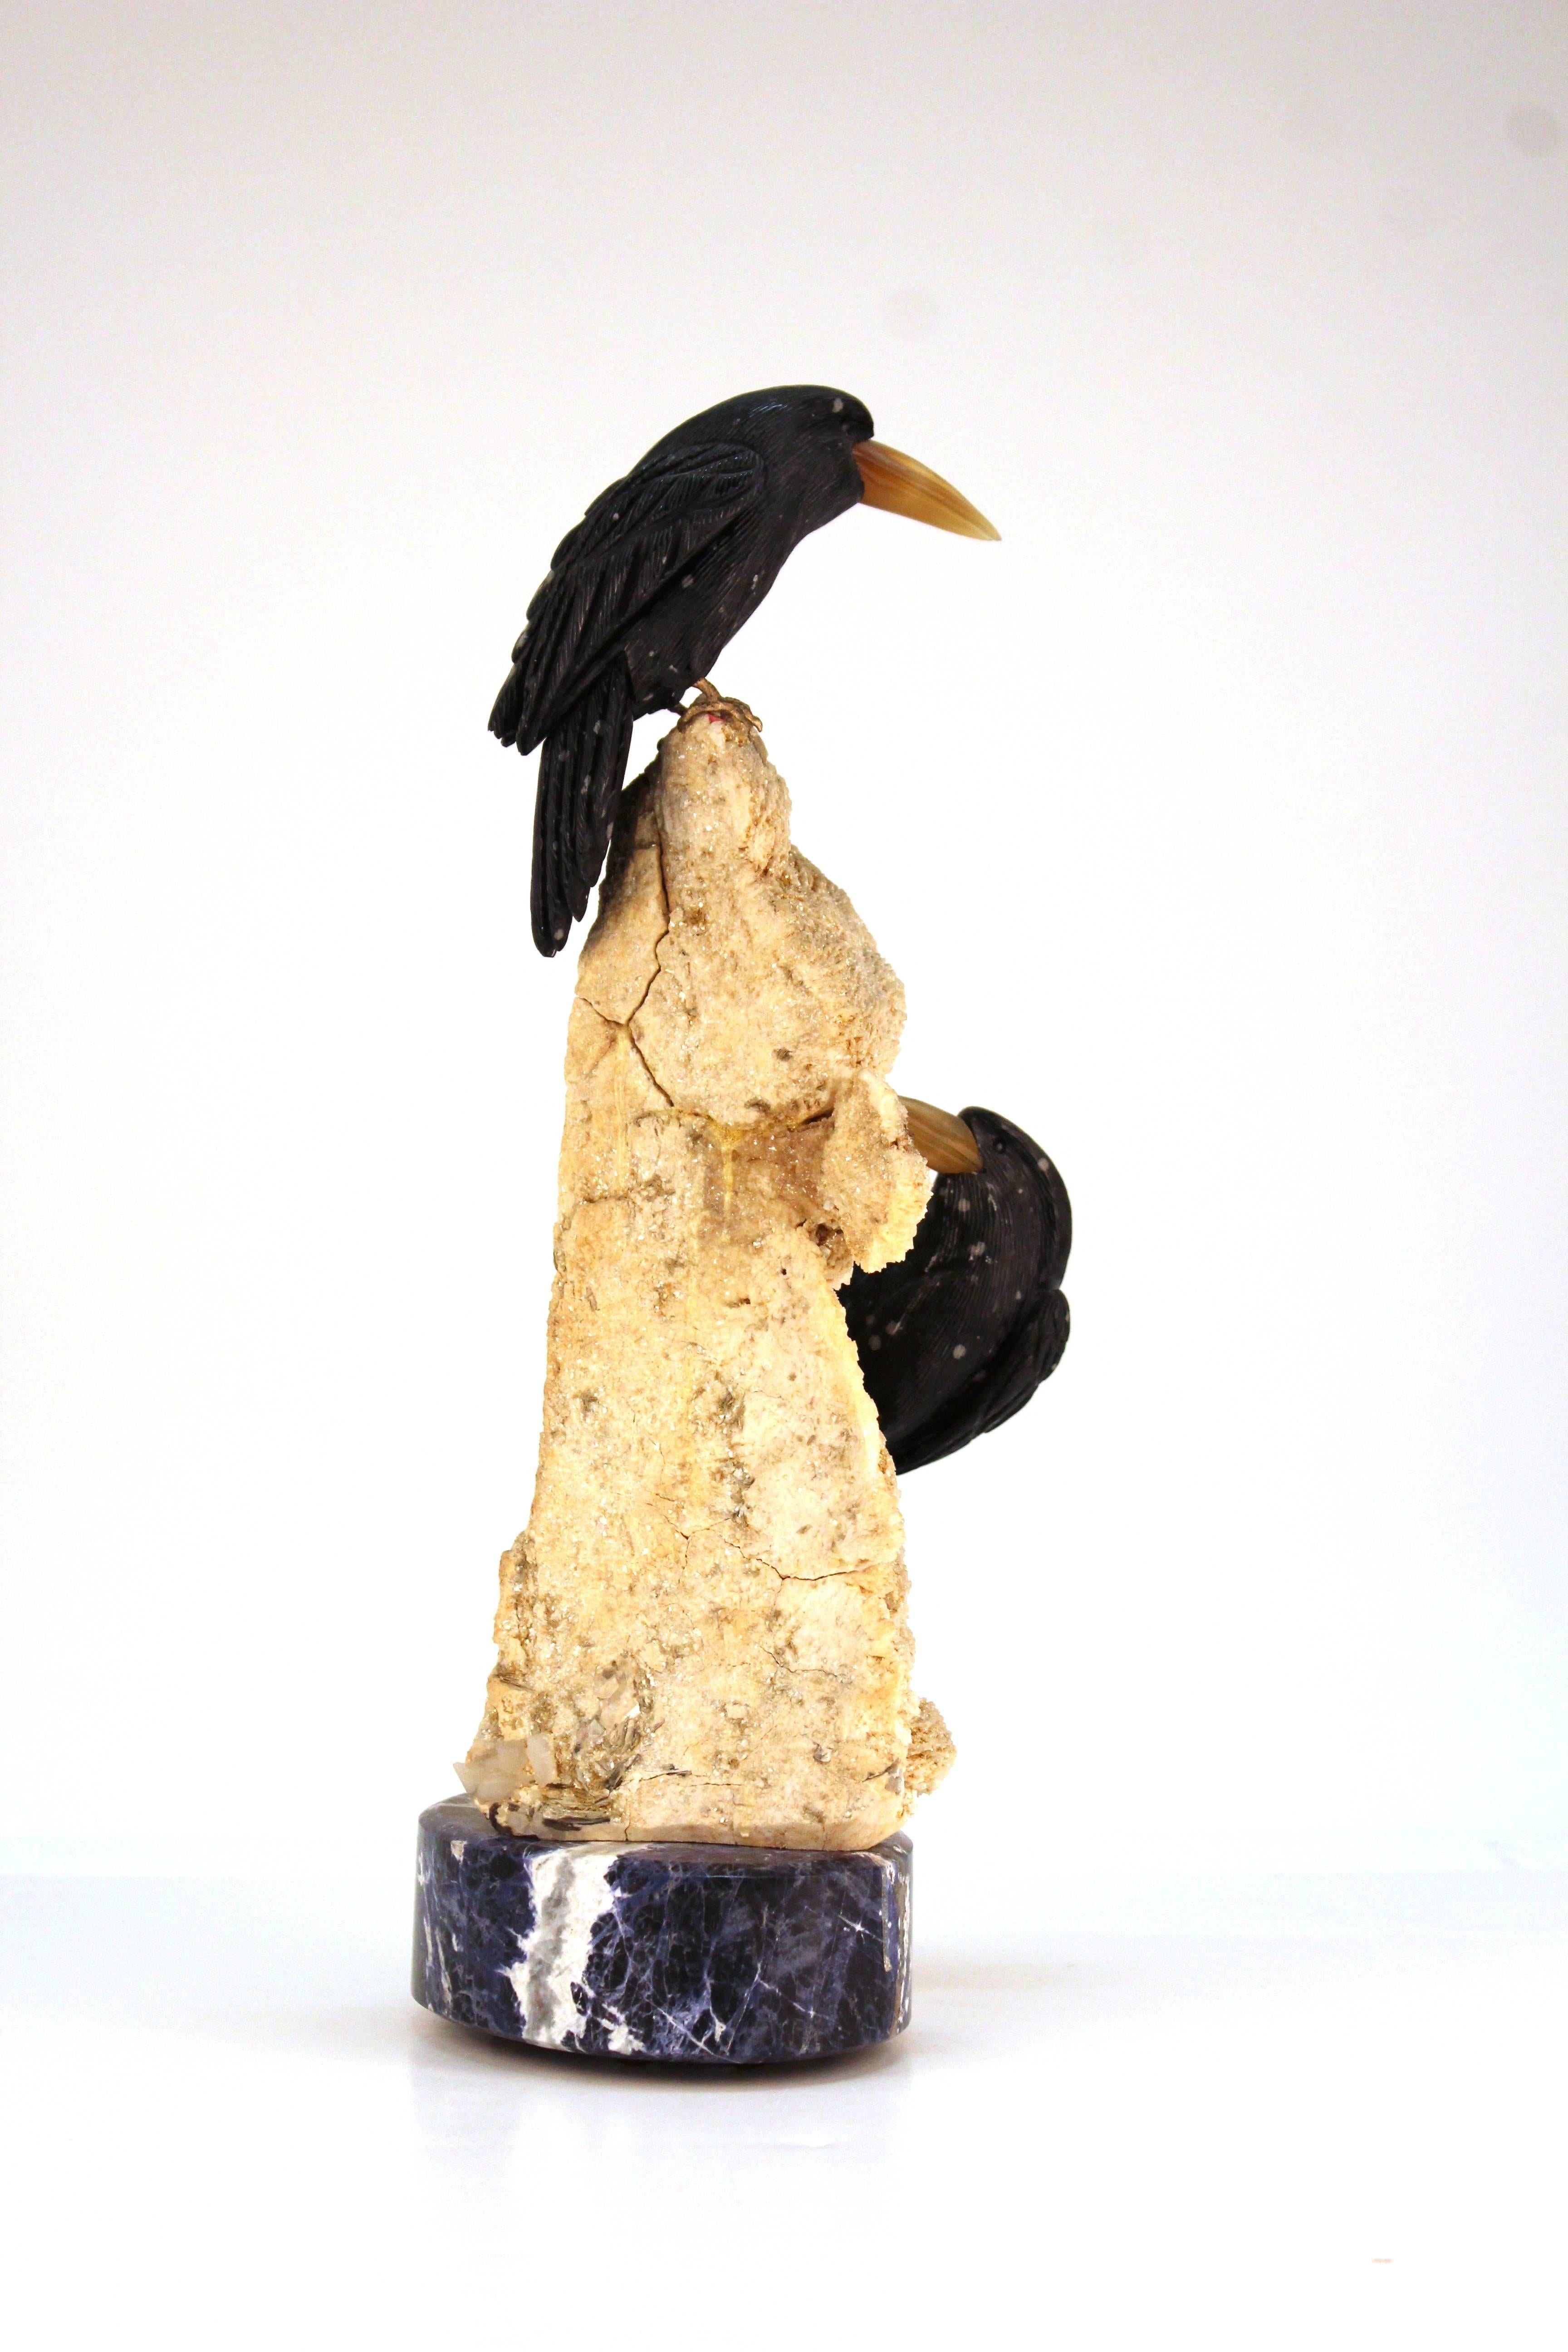 A sculpture made from a bone colored rock crystal. Includes two detailed birds carved from black stone. Mounted on a blue marble base. Despite some wear appropriate to material and use the piece is in good condition.